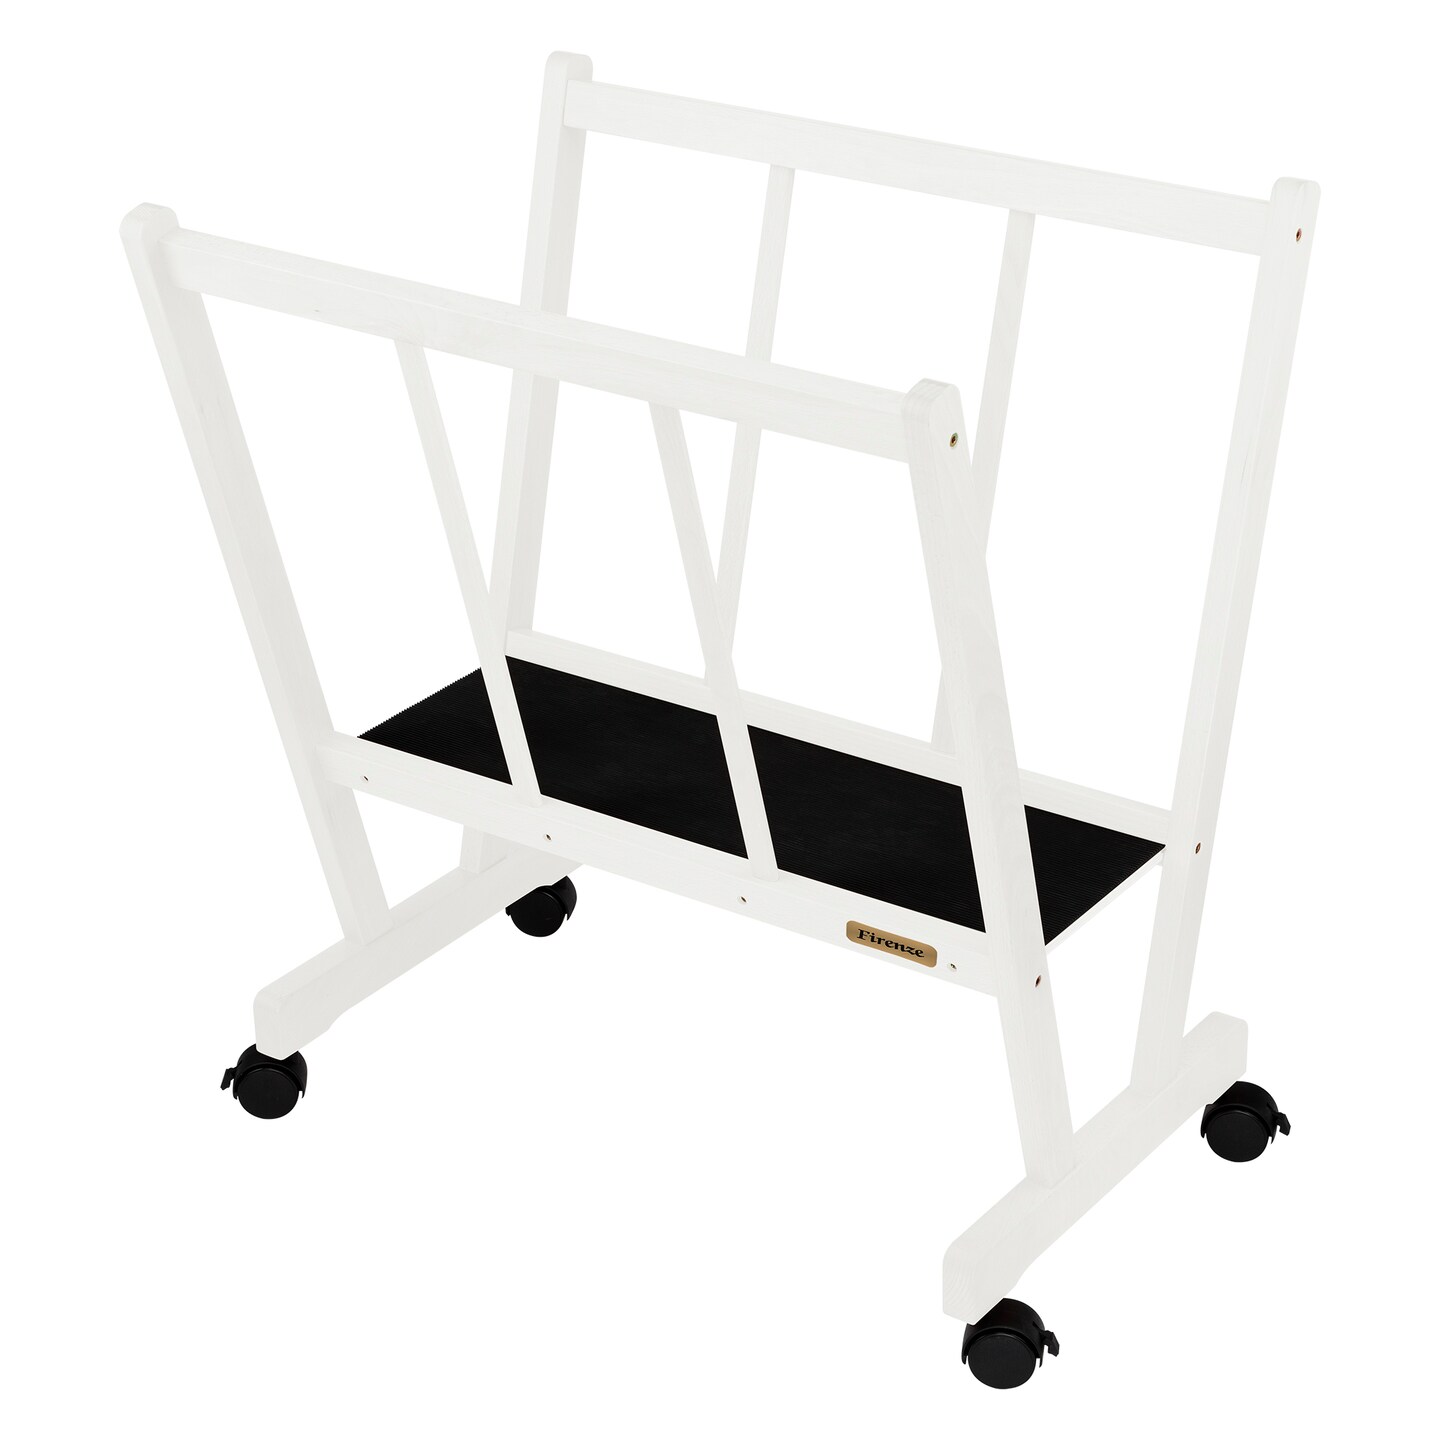 Creative Mark Firenze Wood Large Print Rack with Castors - Perfect for Display of Canvas, Art, Prints, Panels, Posters, Art Gallery Shows, Storage Rack